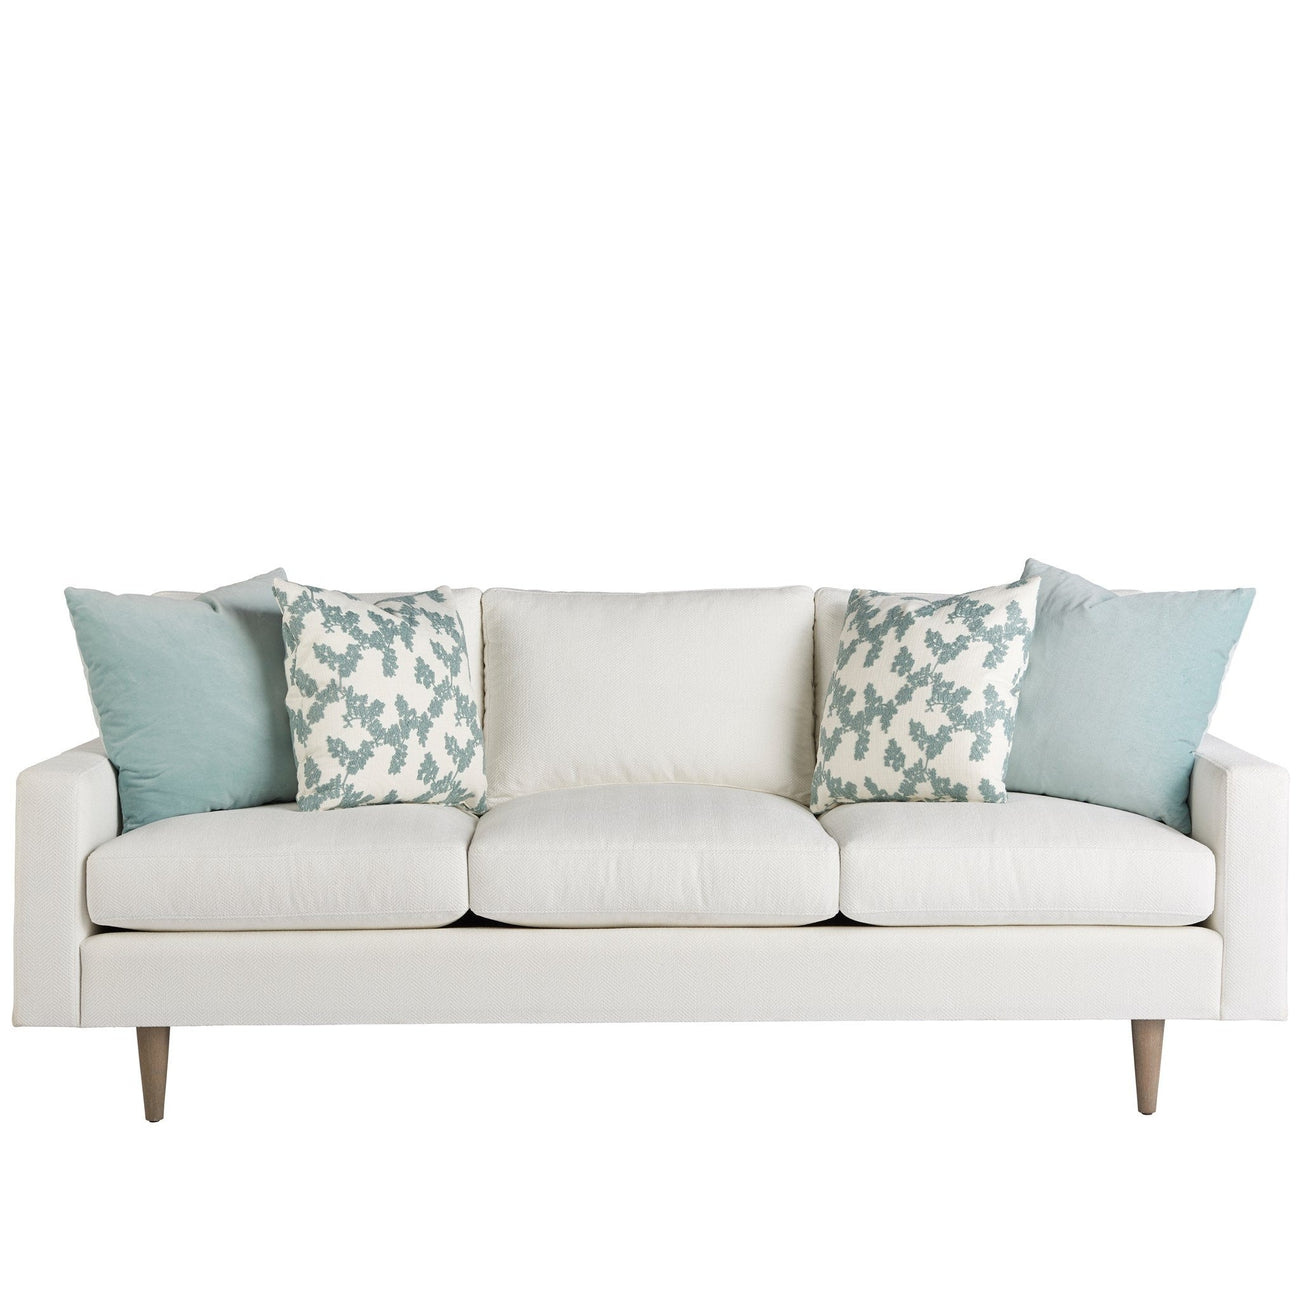 Brentwood Sofa - Love. Joy. Bliss. - Miranda Kerr Home Collection-Universal Furniture-UNIV-956501-960-Sofas-3-France and Son